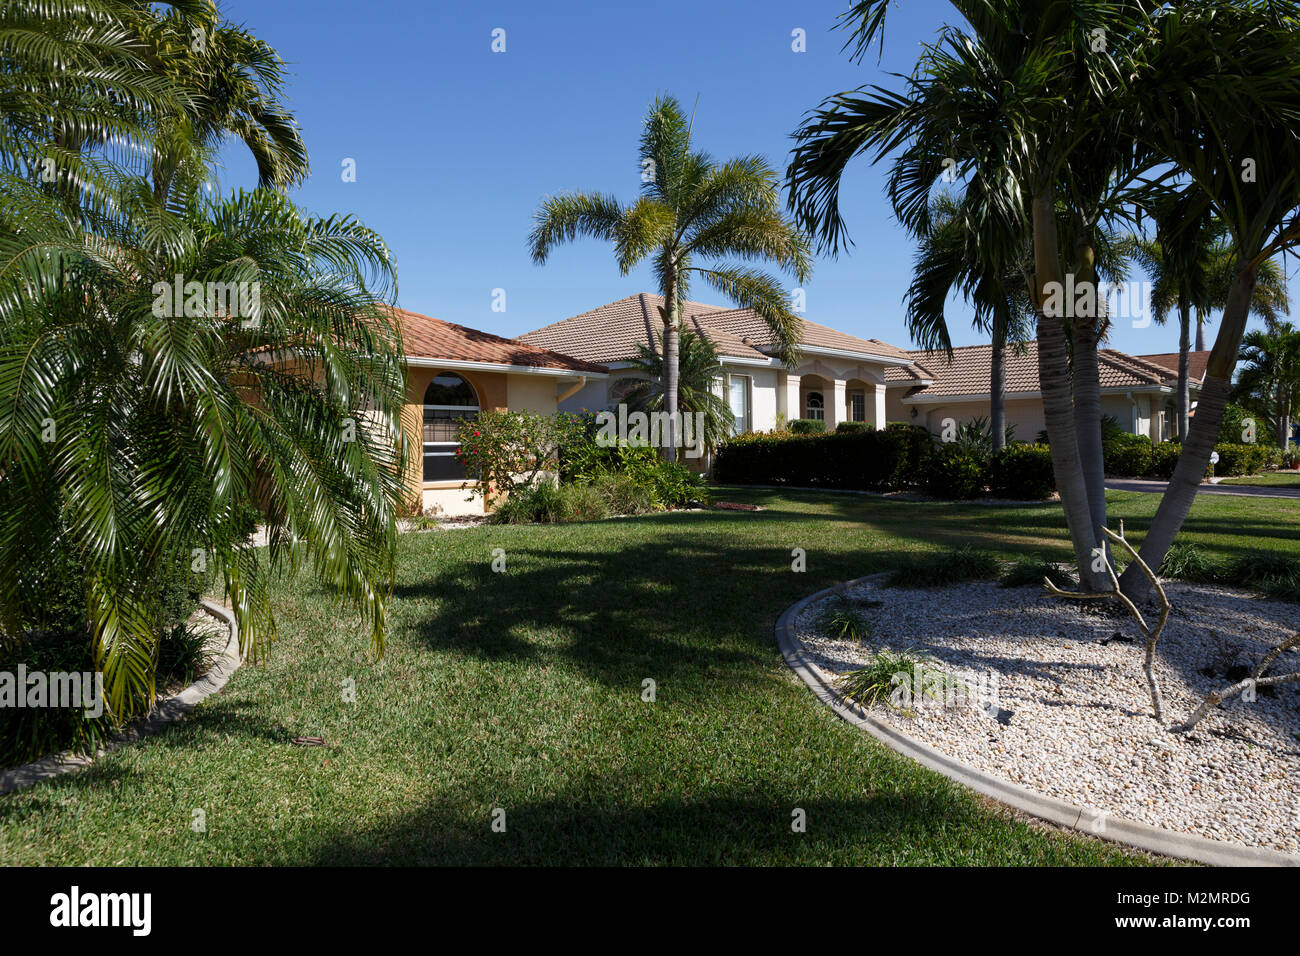 House, Lawn Yard, Residential neighborhood of Cape Choral, Fort Myers, Gulf Coast, Florida Stock Photo